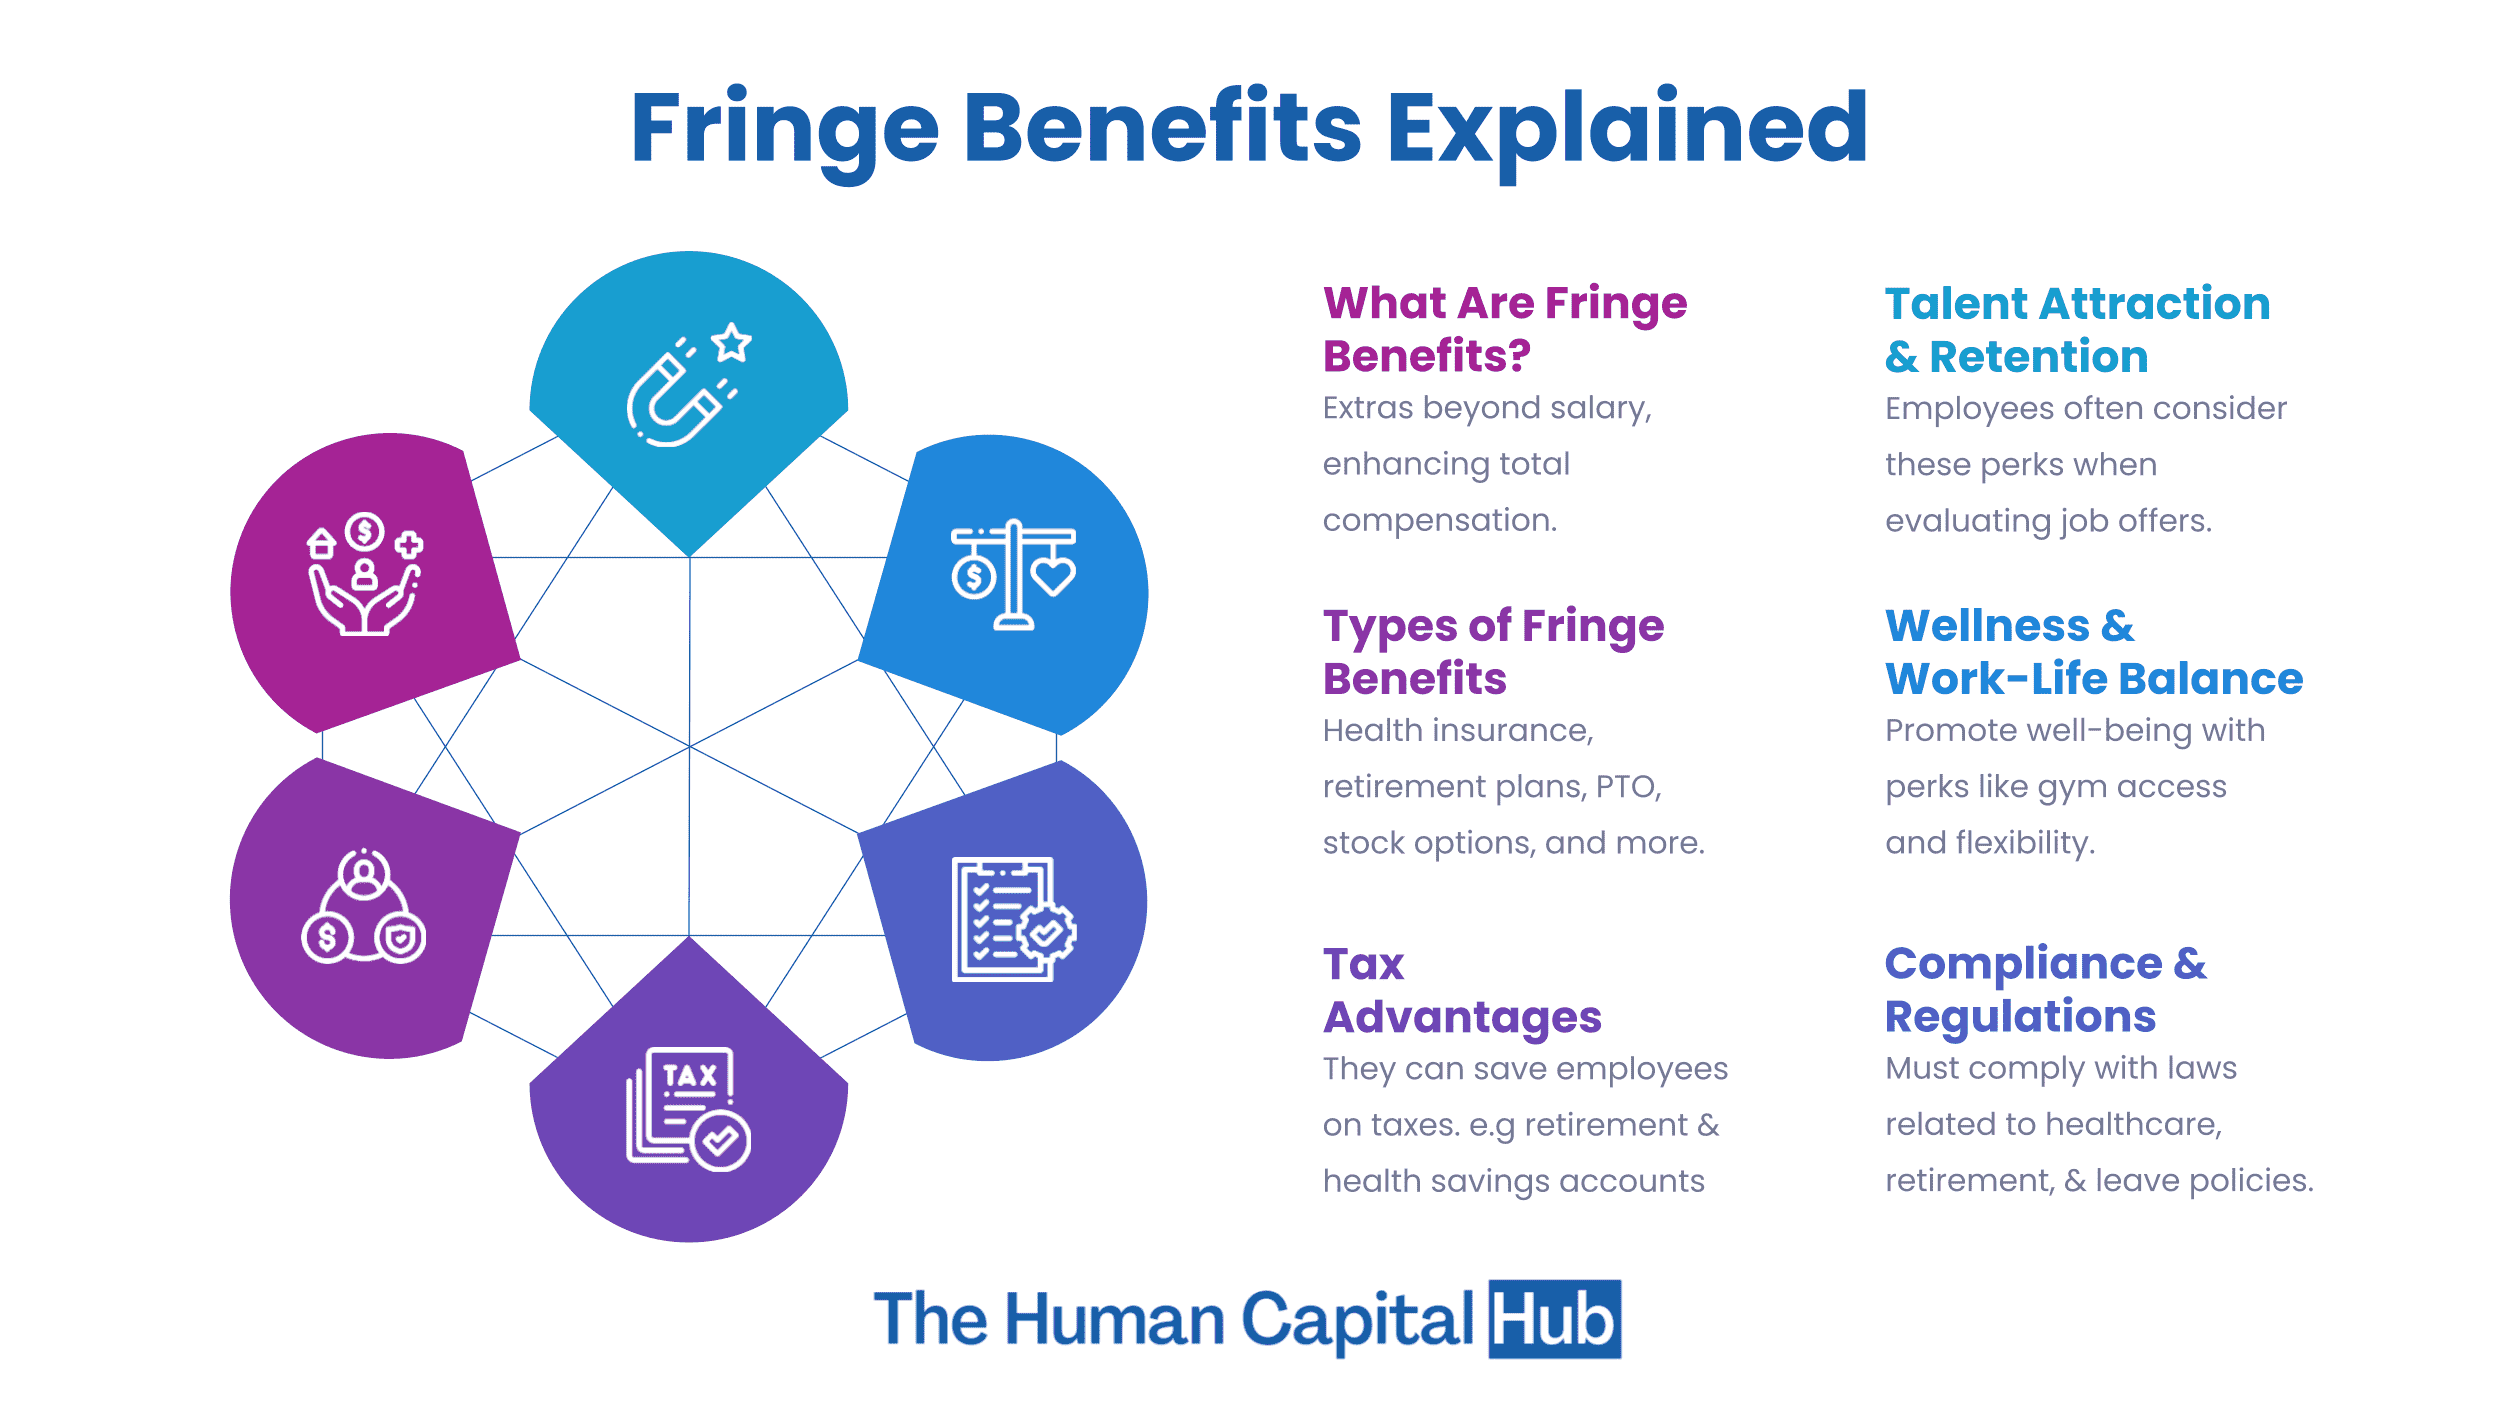 Fringe Benefits: What Exactly are They?